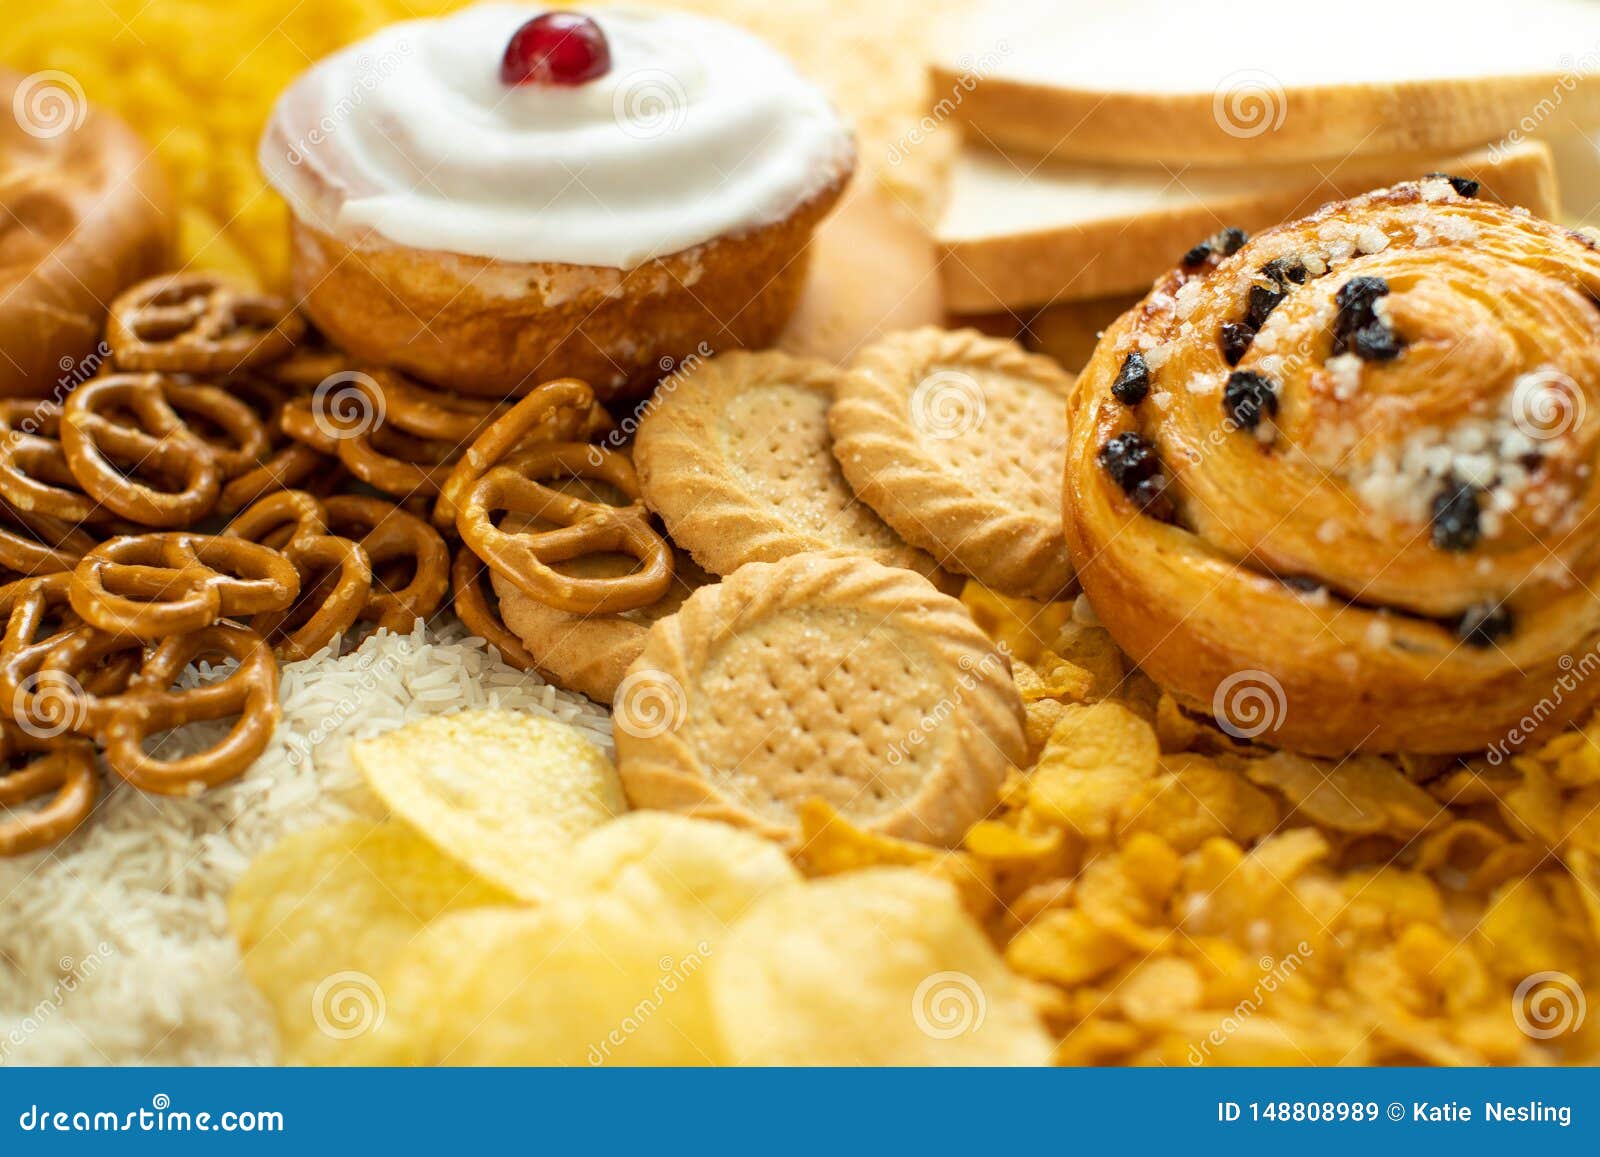 full frame shot of foods containing unhealthy or bad carbohydrates